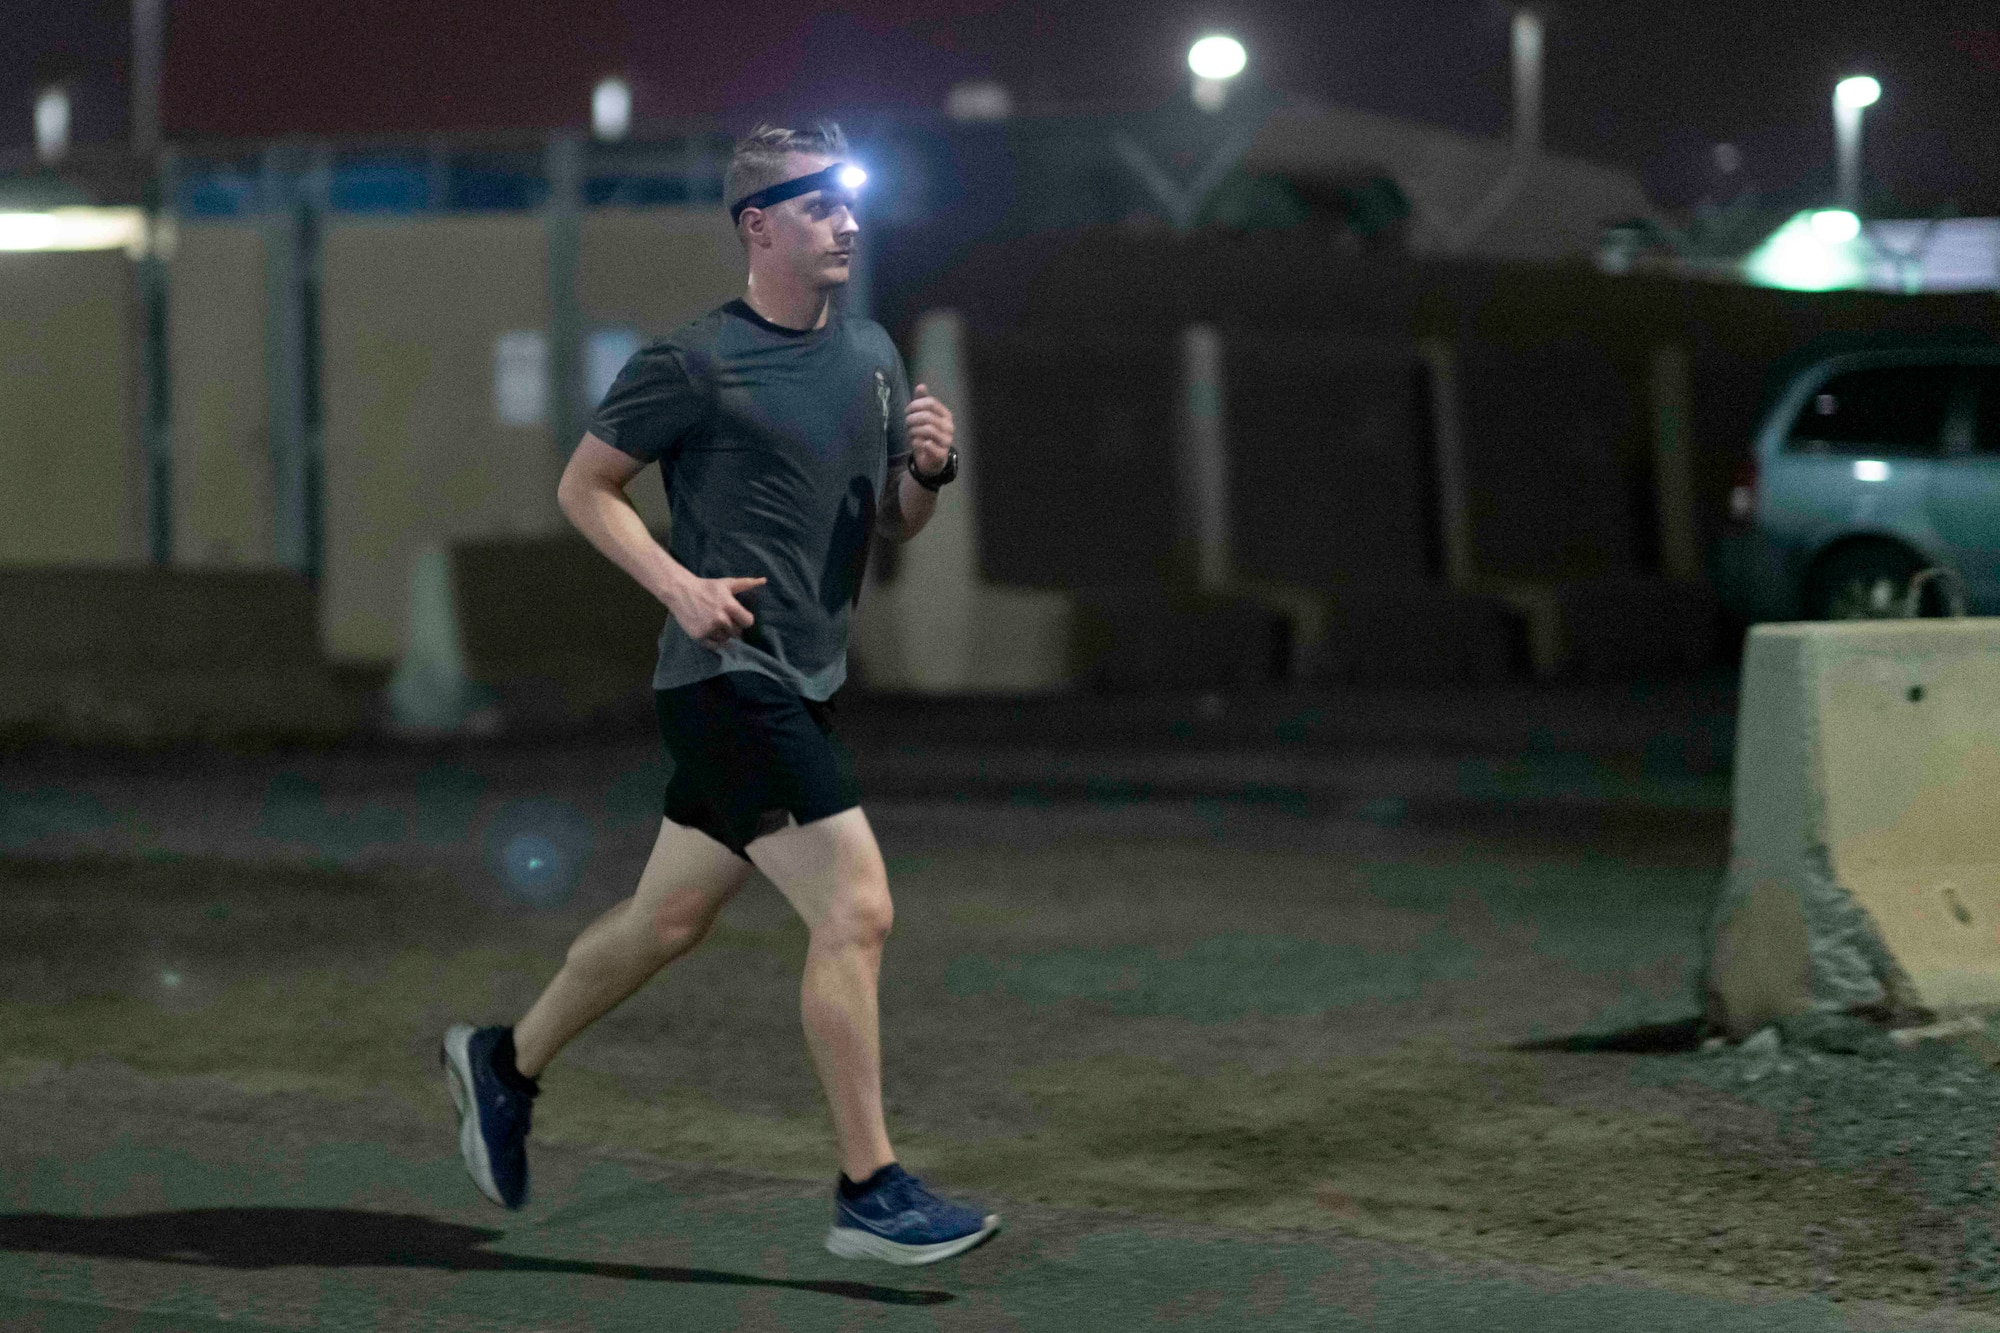 Photo of a man running on a road at night